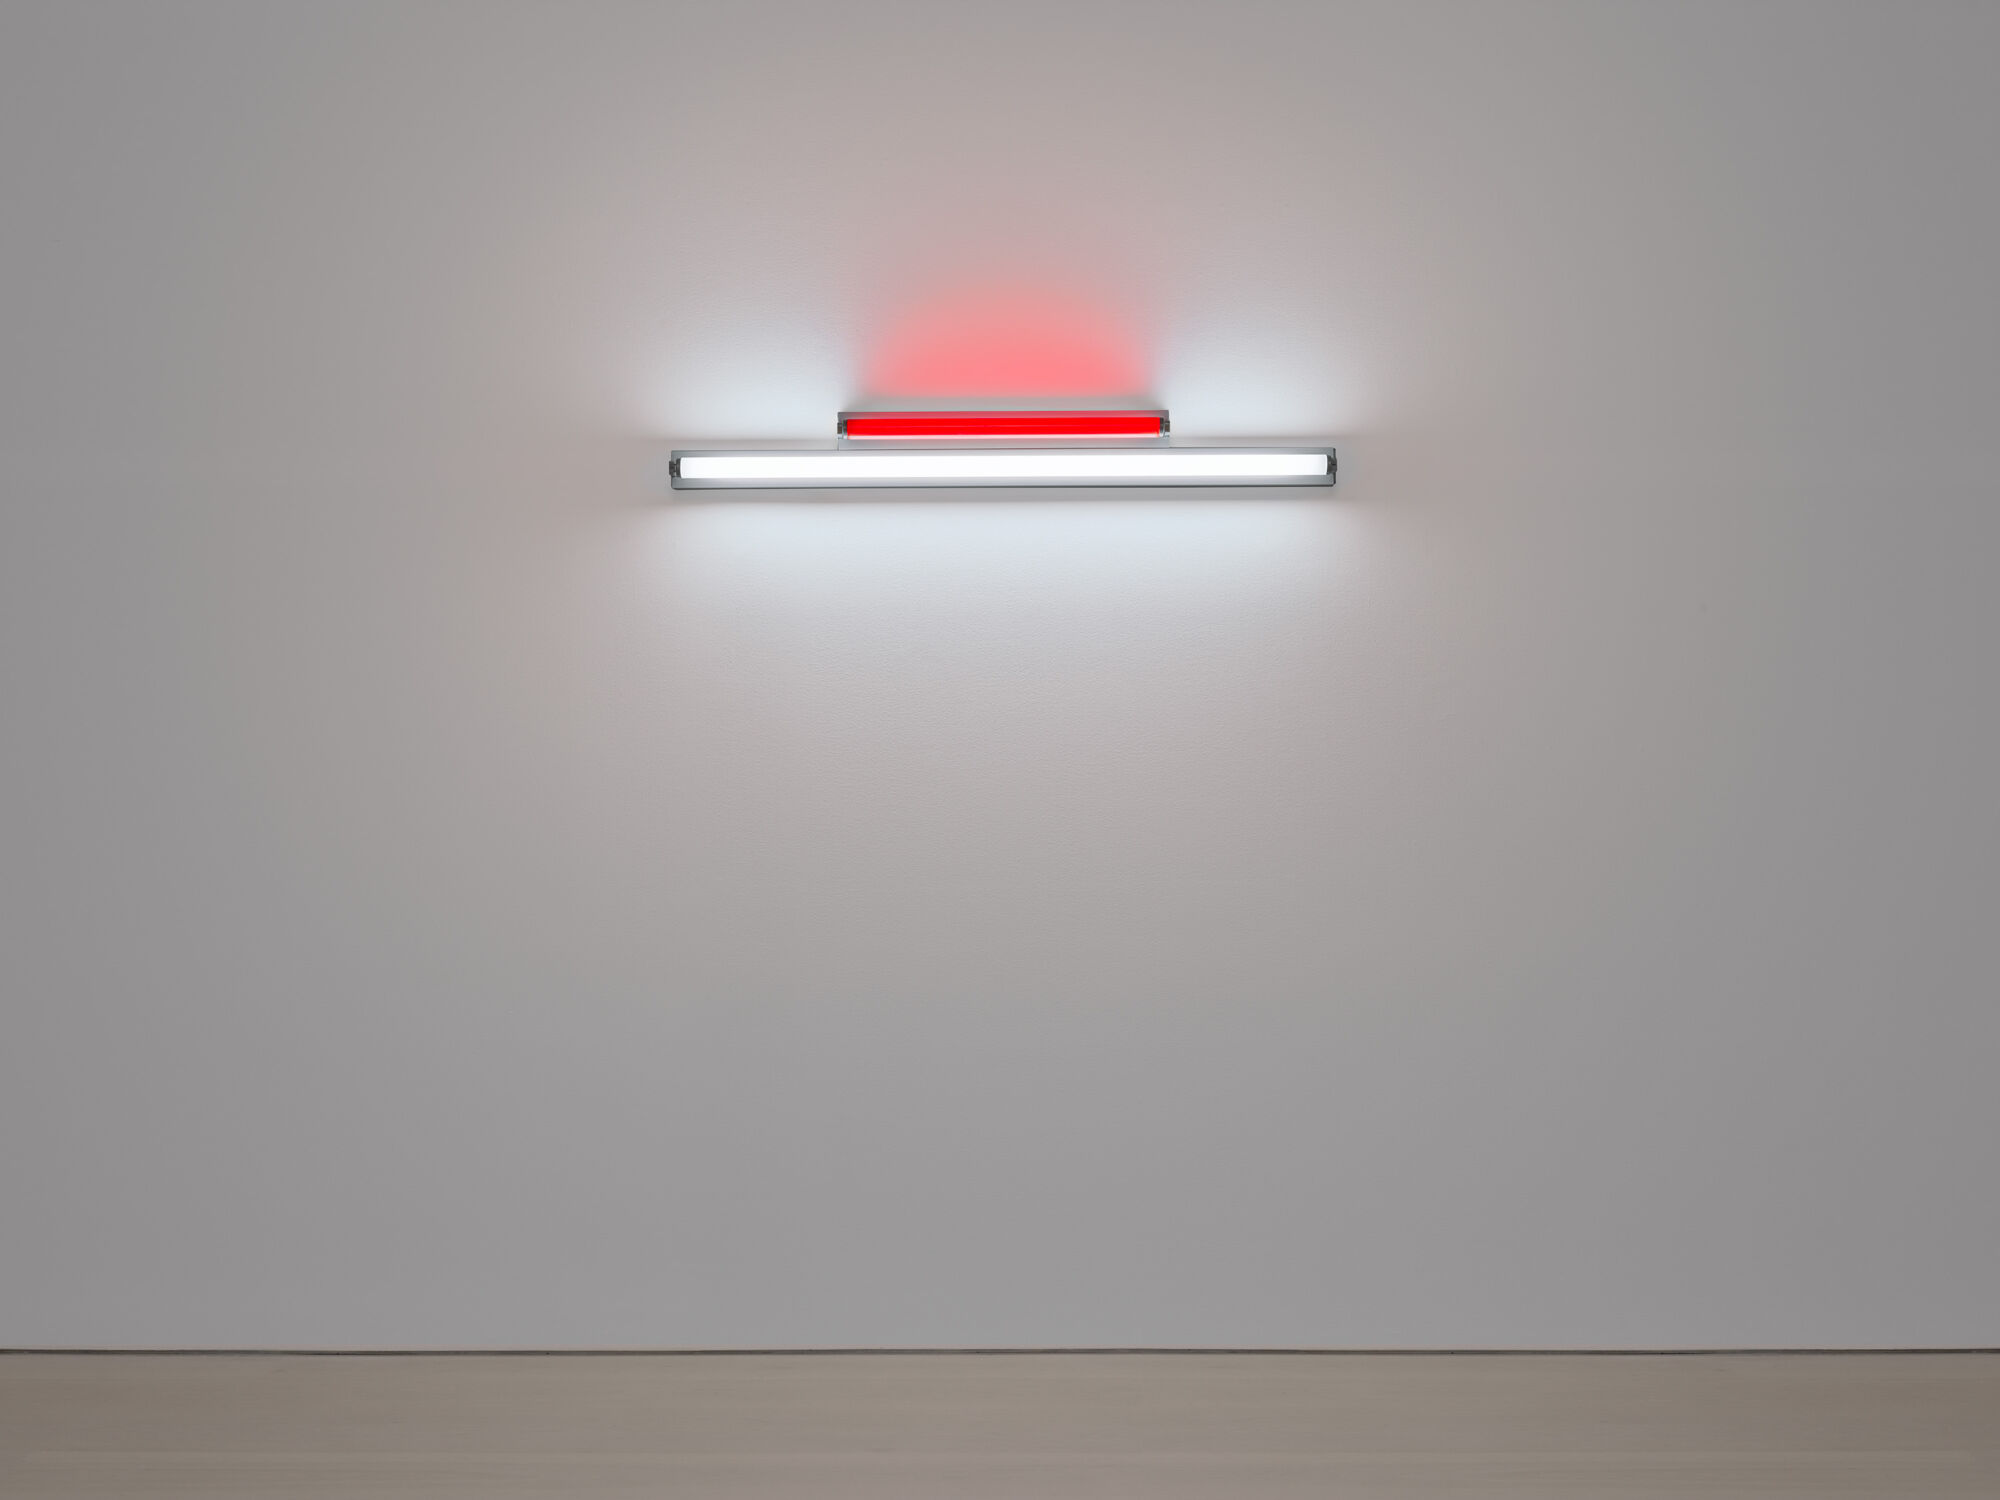 The Wick - Dan Flavin
untitled
1976
red and daylight fluorescent light
© 2023 Stephen Flavin/Artists Rights Society (ARS), New York
Courtesy David Zwirner
